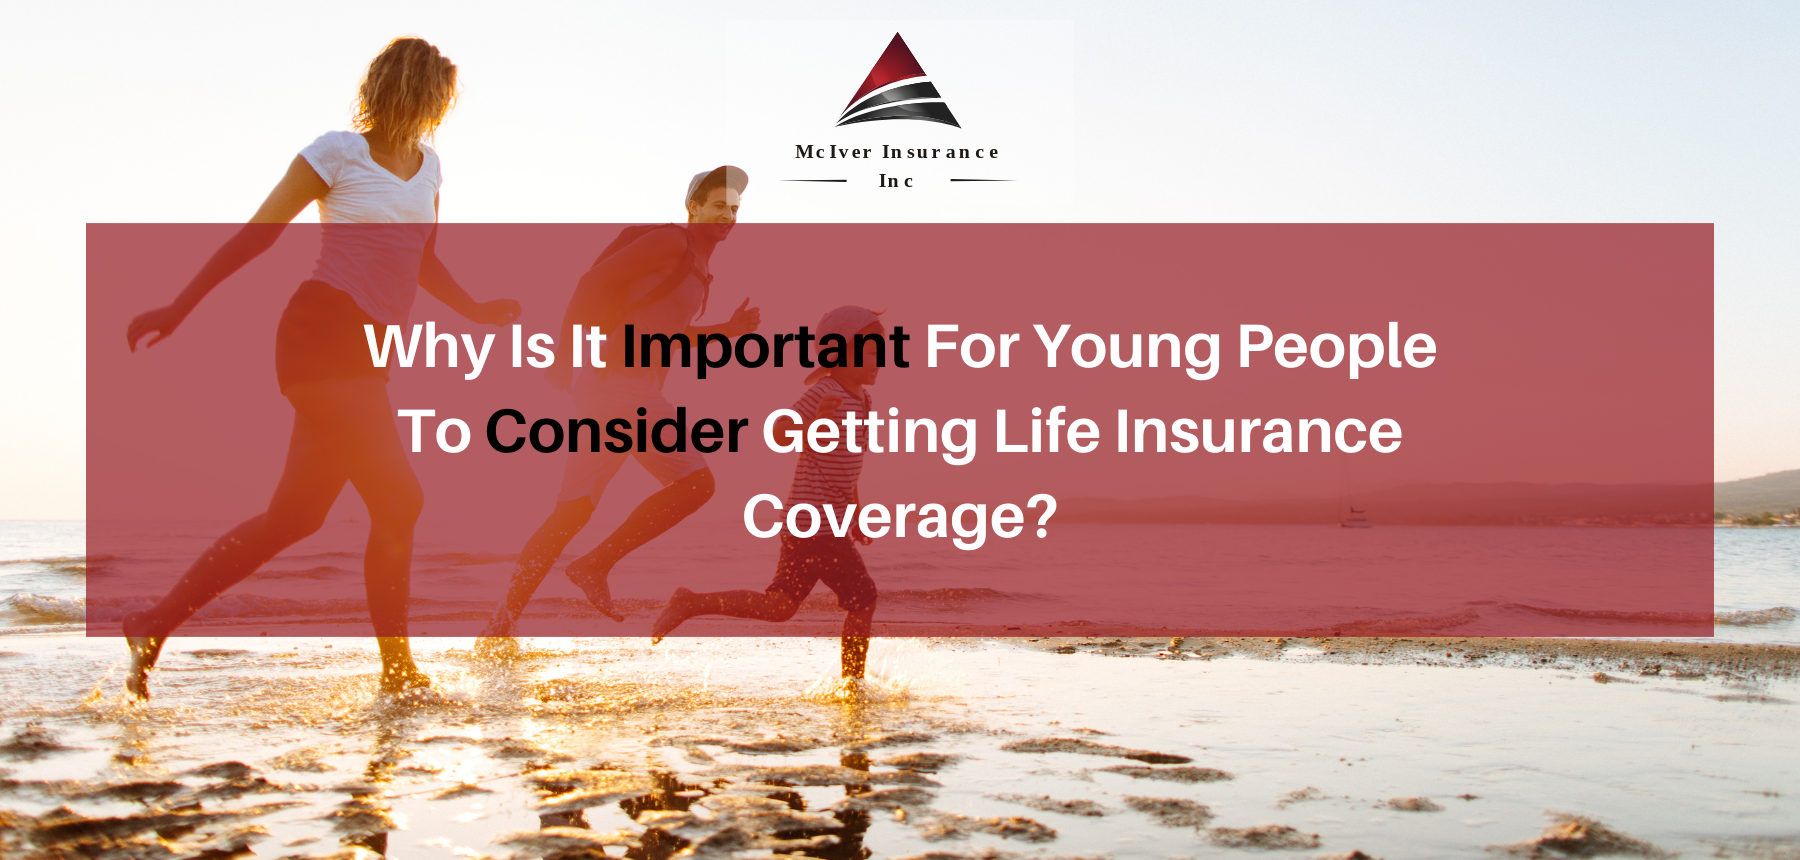 Why Is It Important For Young People To Consider Getting Life Insurance Coverage